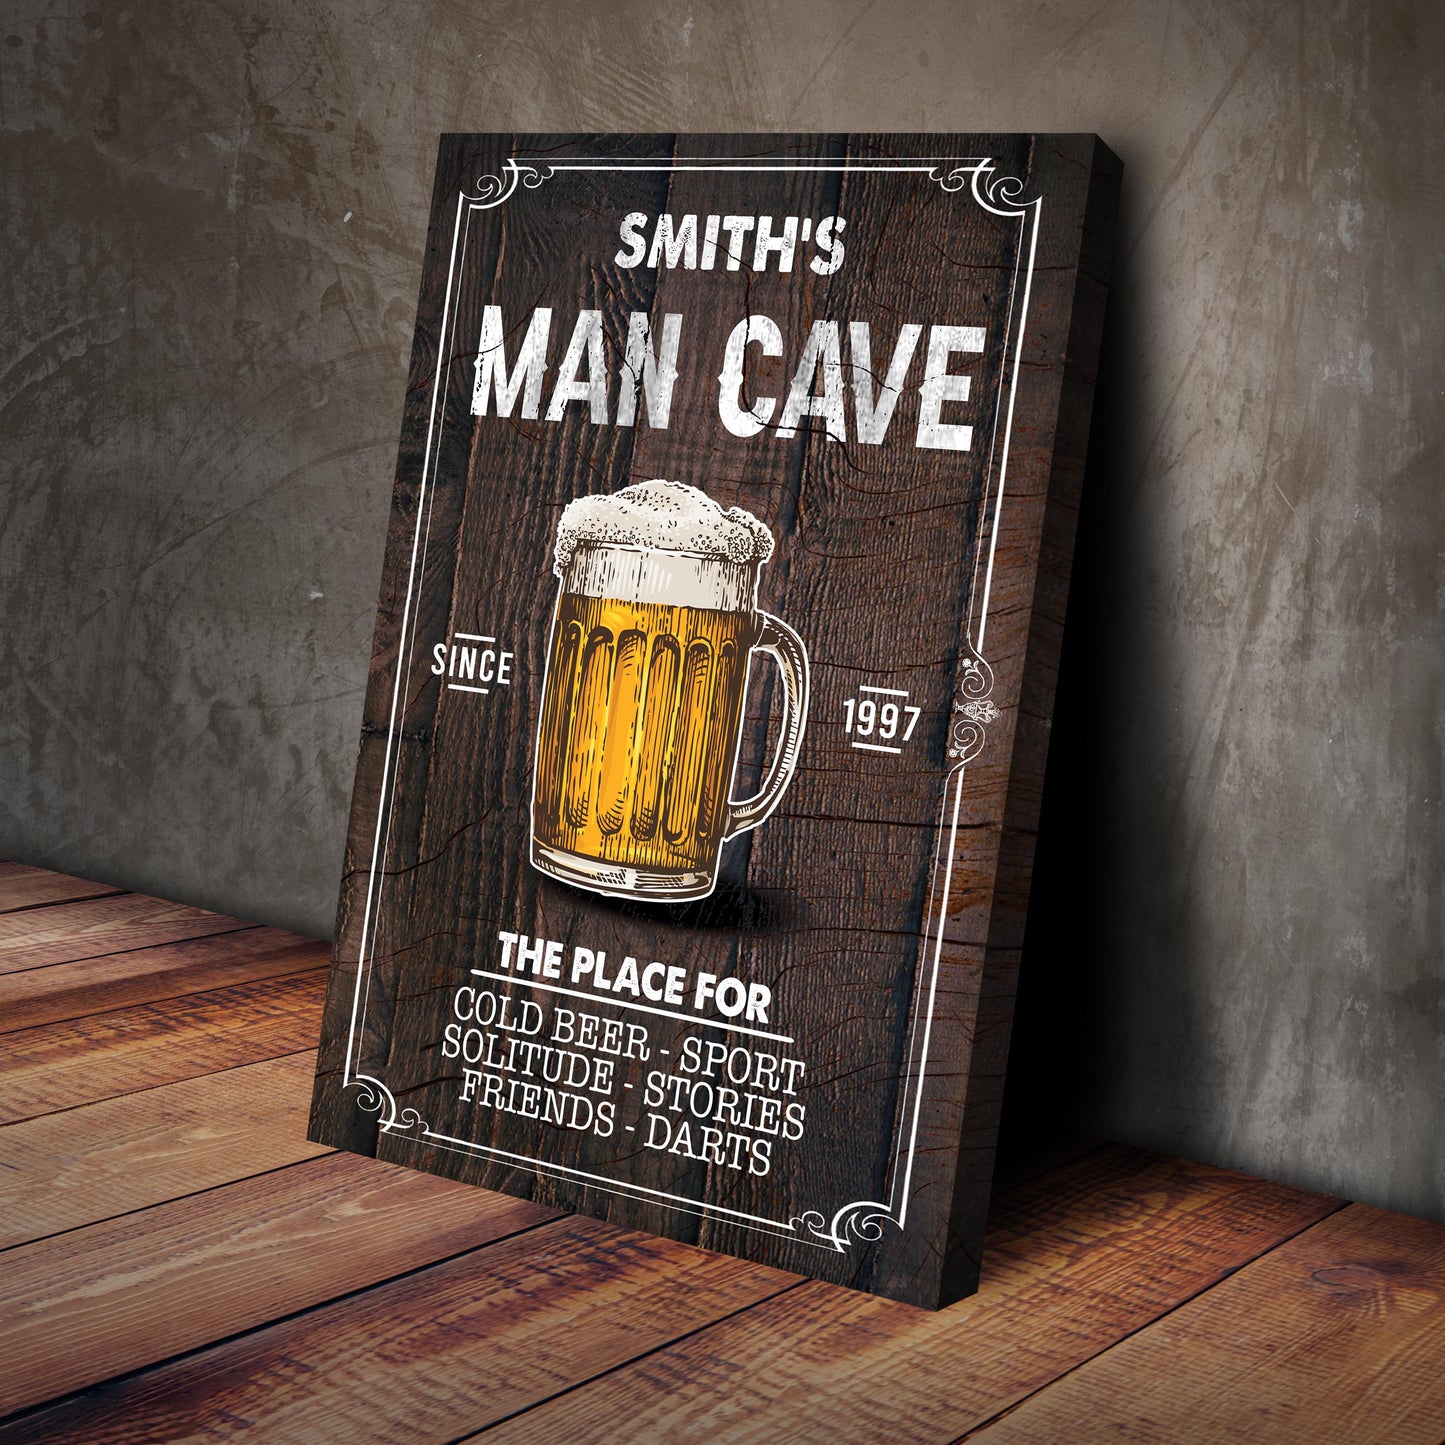 Man Cave The Place For Cold Beer, Solitude, Friends Sign